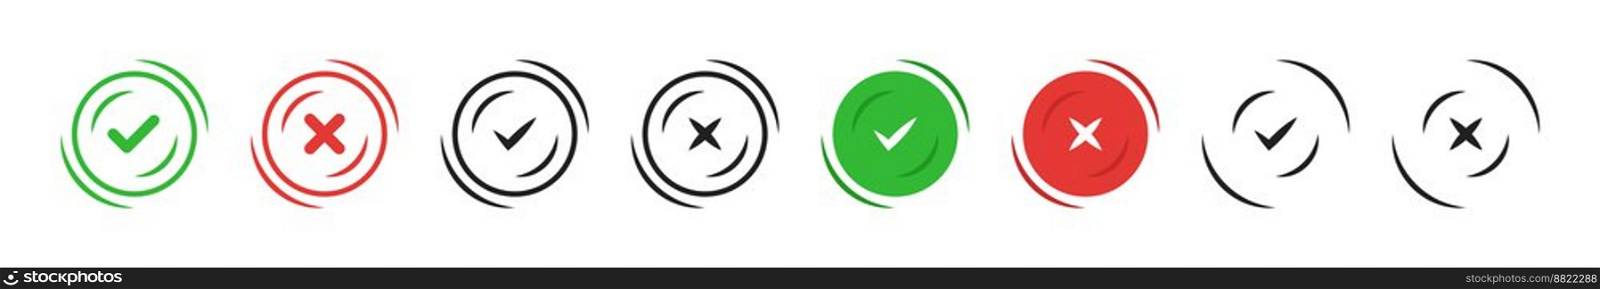 Check mark and cross icon. Green tick and red cross sign symbol. Test question. Positive Negative sign. 